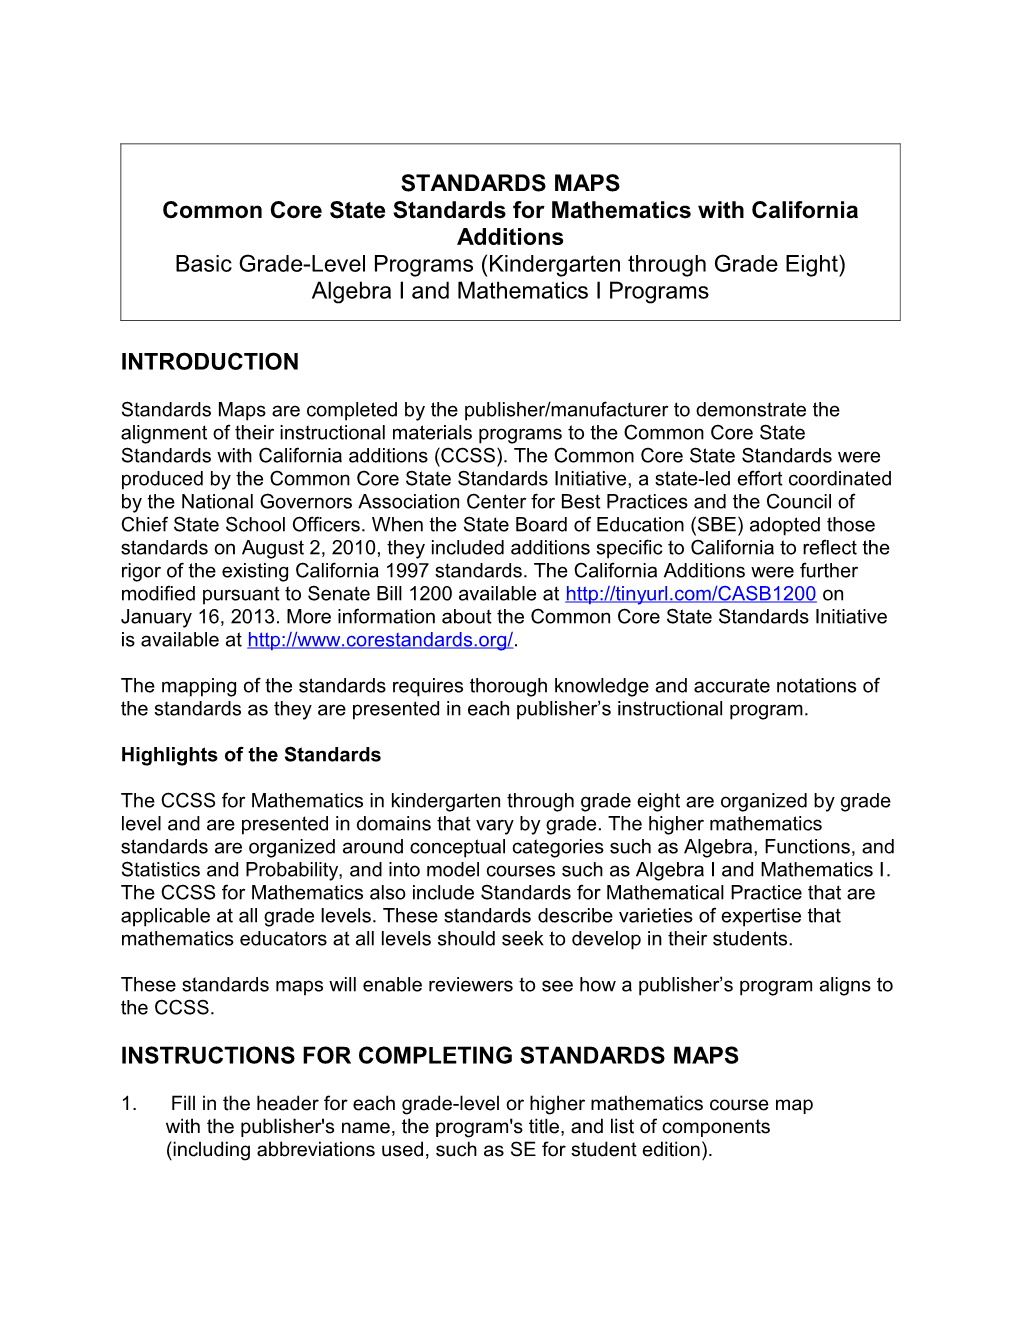 Instructions for Standards Maps - Instructional Materials (CA Dept of Education)